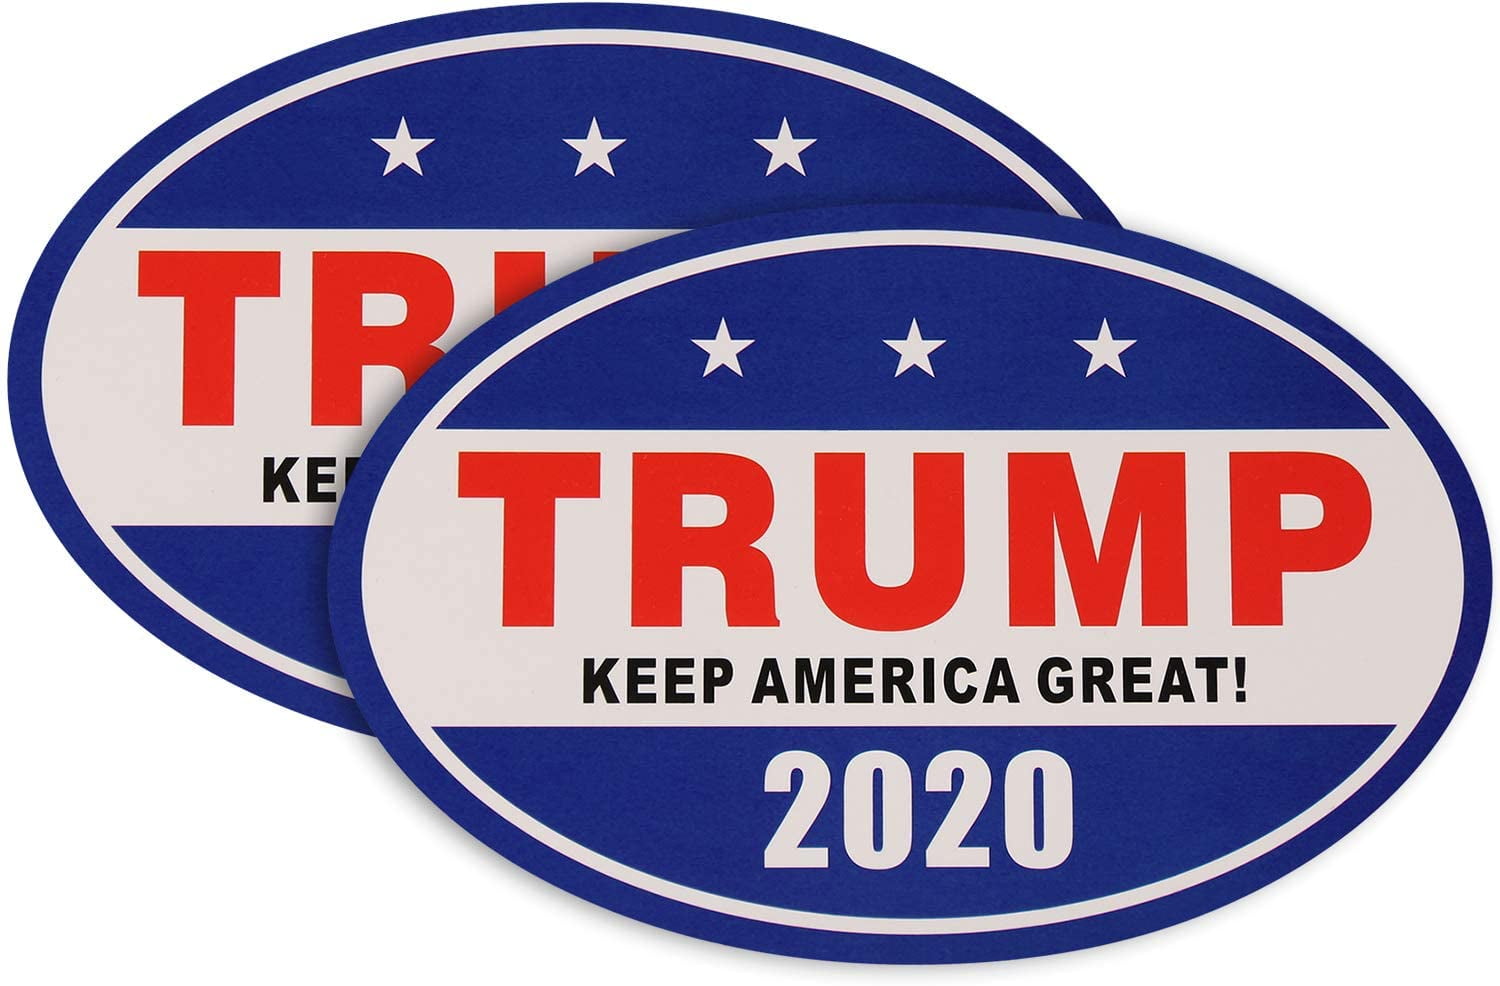 TRUMP 2nd term 2020 Political Bumper Stickers Oval Decals Black and Blue 5"x3" 